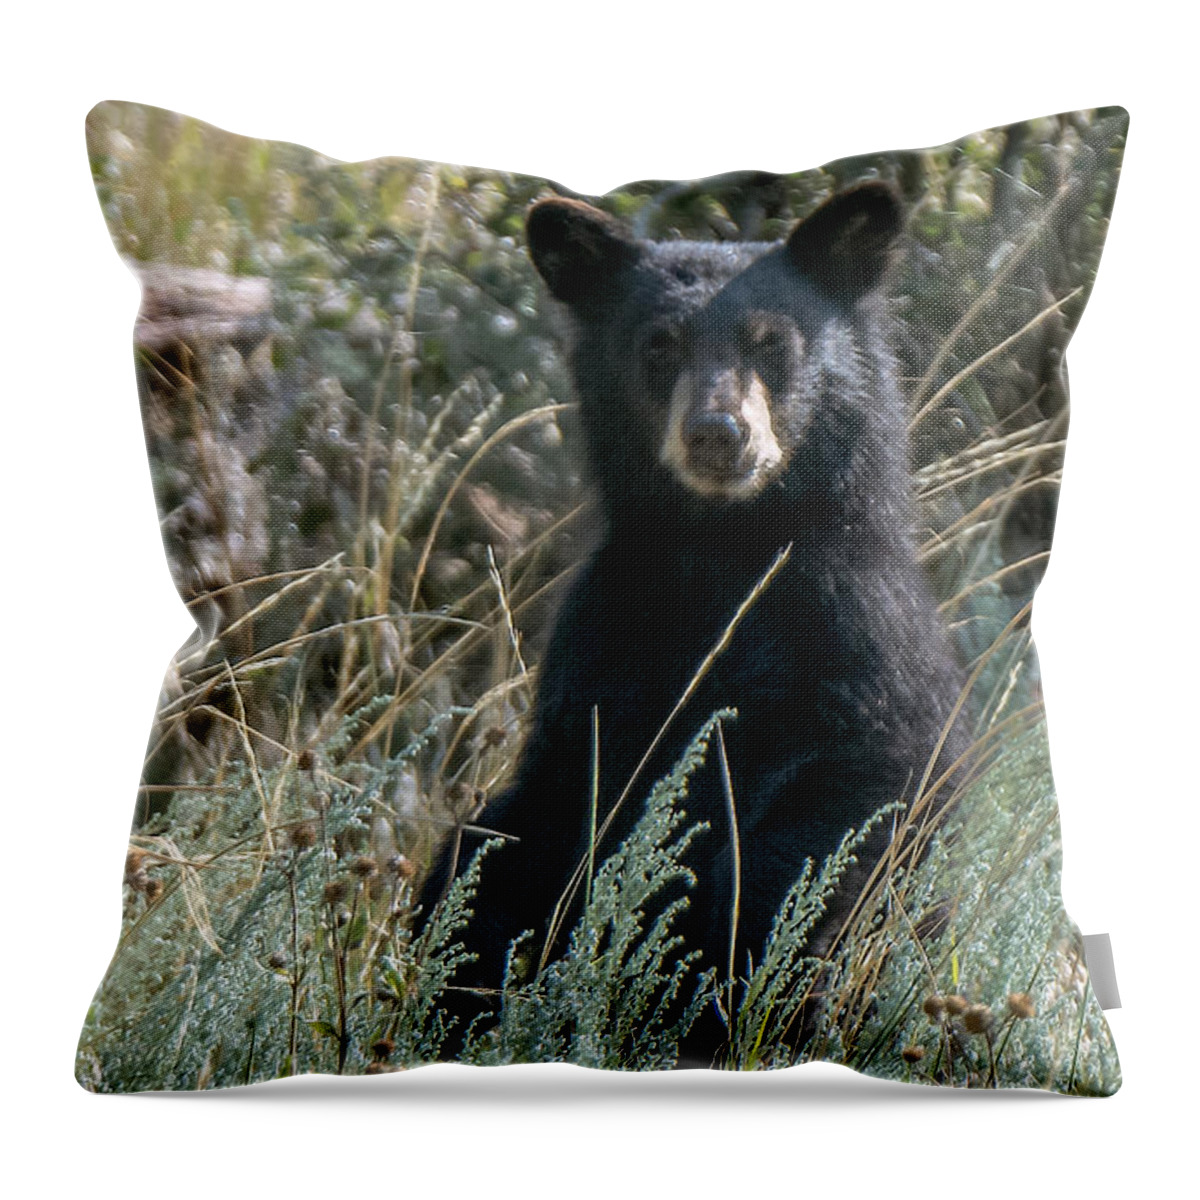 Black Bear Throw Pillow featuring the photograph Bear Cub At Waterton Canyon by Stephen Johnson